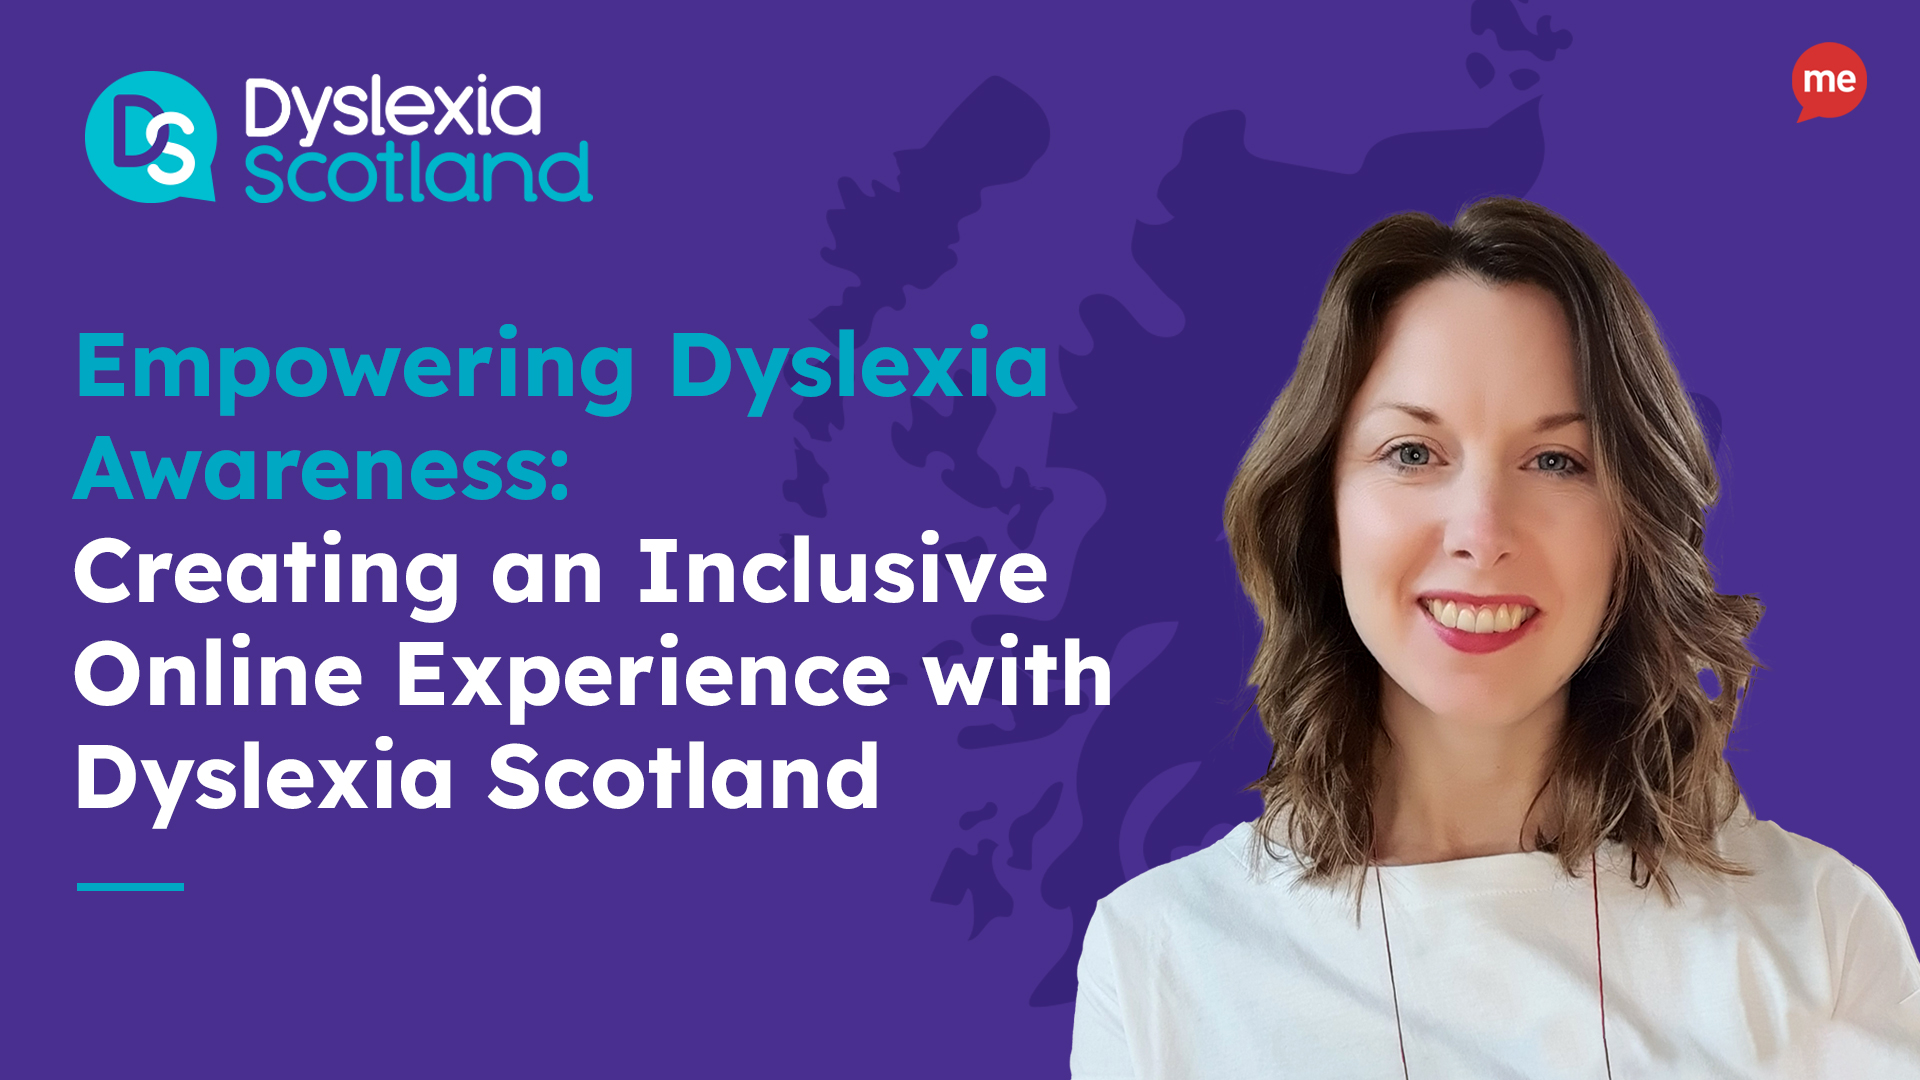 Empowering Dyslexia Awareness: Creating an Inclusive Online Experience with Dyslexia Scotland